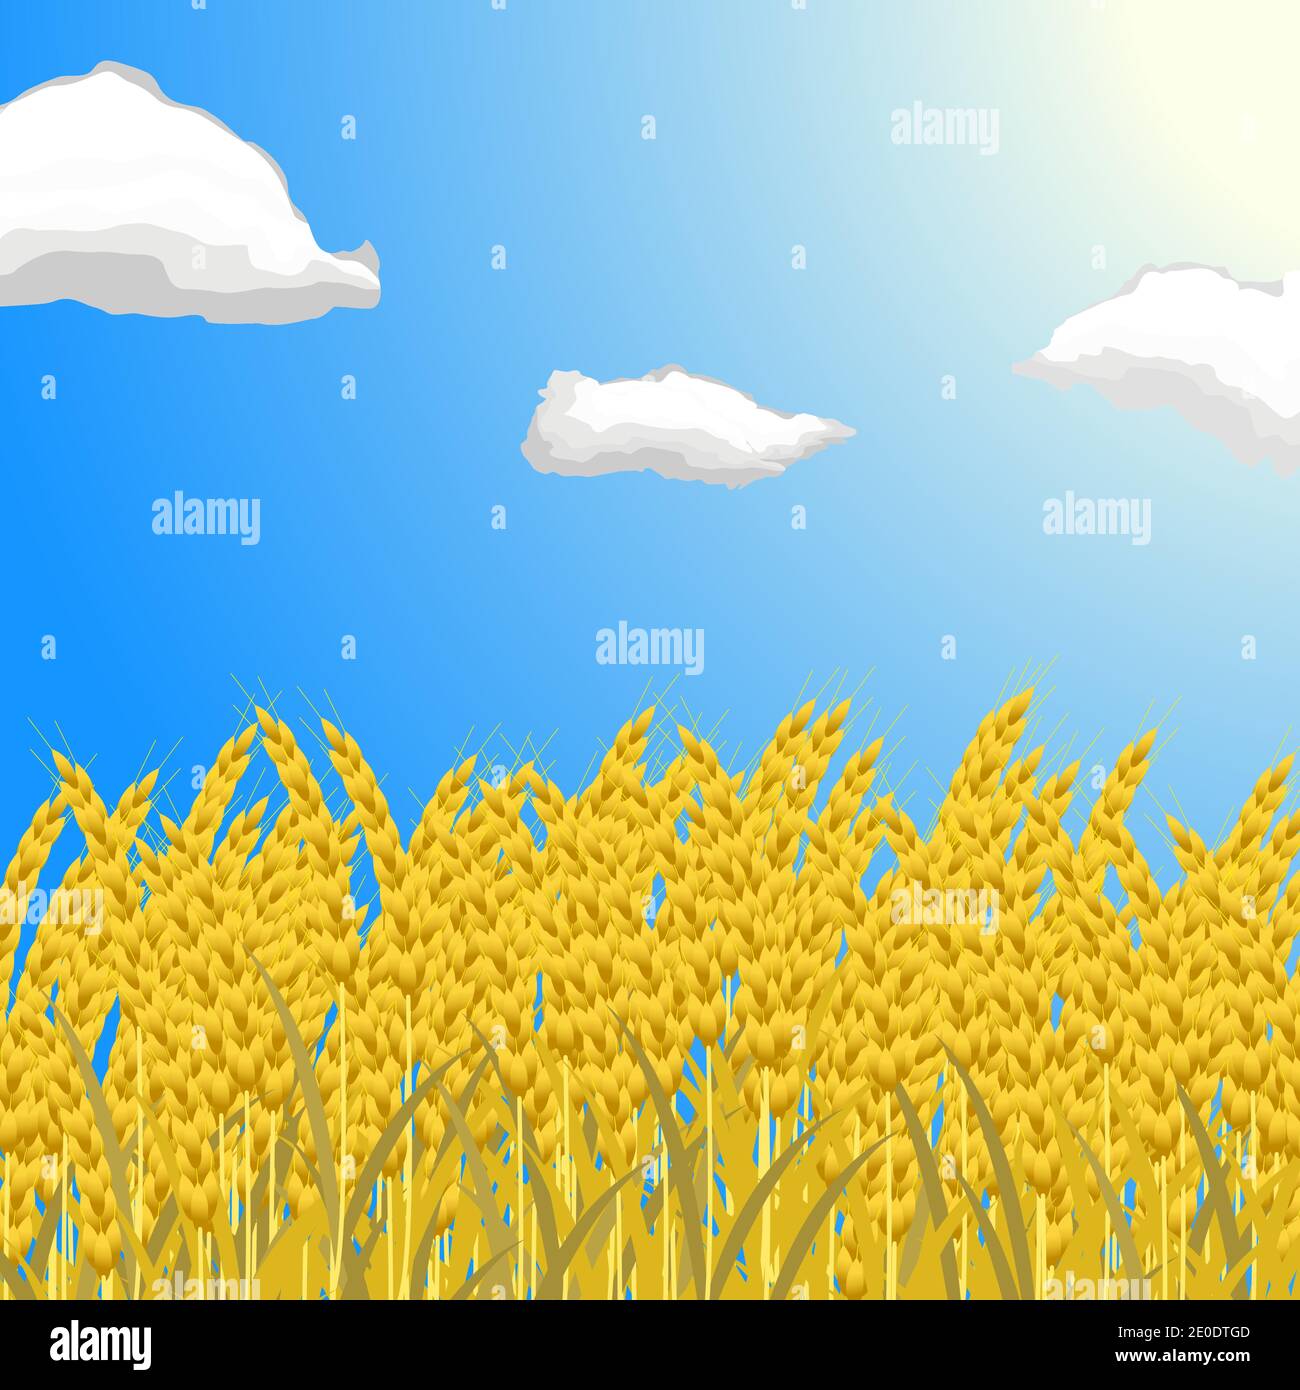 A field with ripe ears of wheat against a blue sky with clouds. Stock Vector